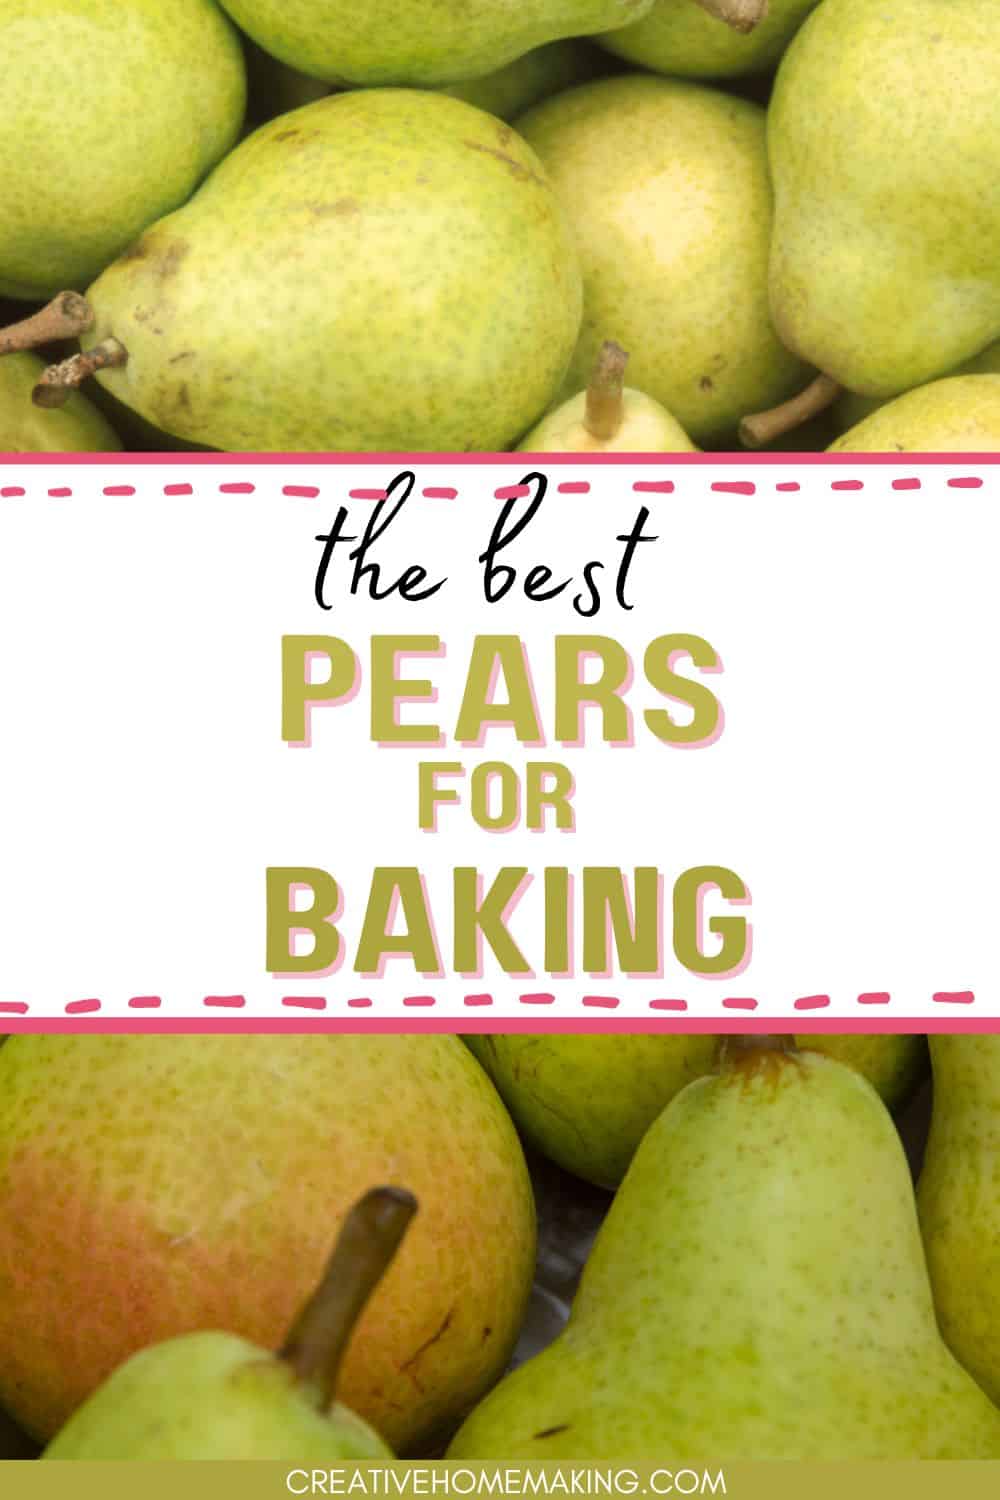 Your Guide to Pears: Bartlett, Bosc and More